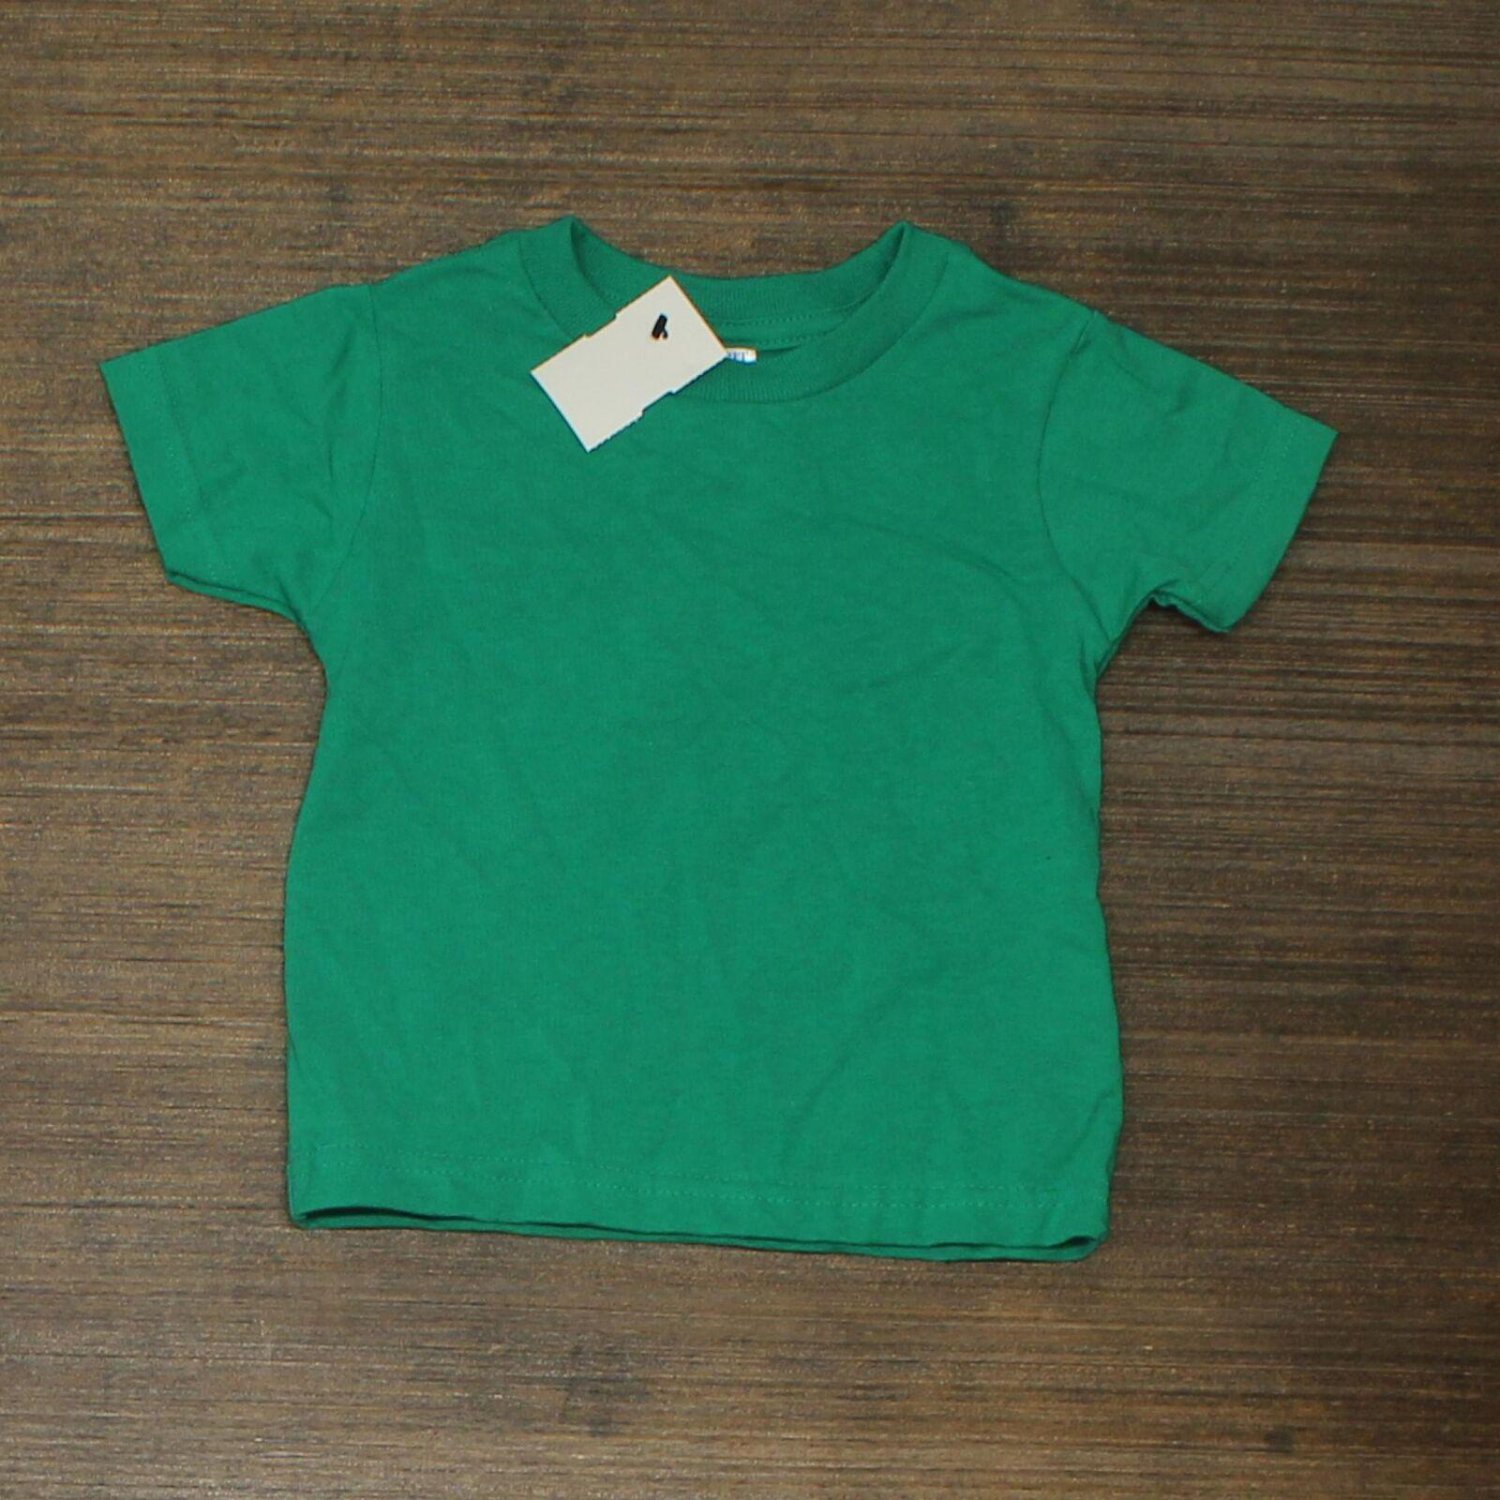 NWT Rabbit Skins Toddler Cotton Jersey Tee 3301T 2T Kelly Green